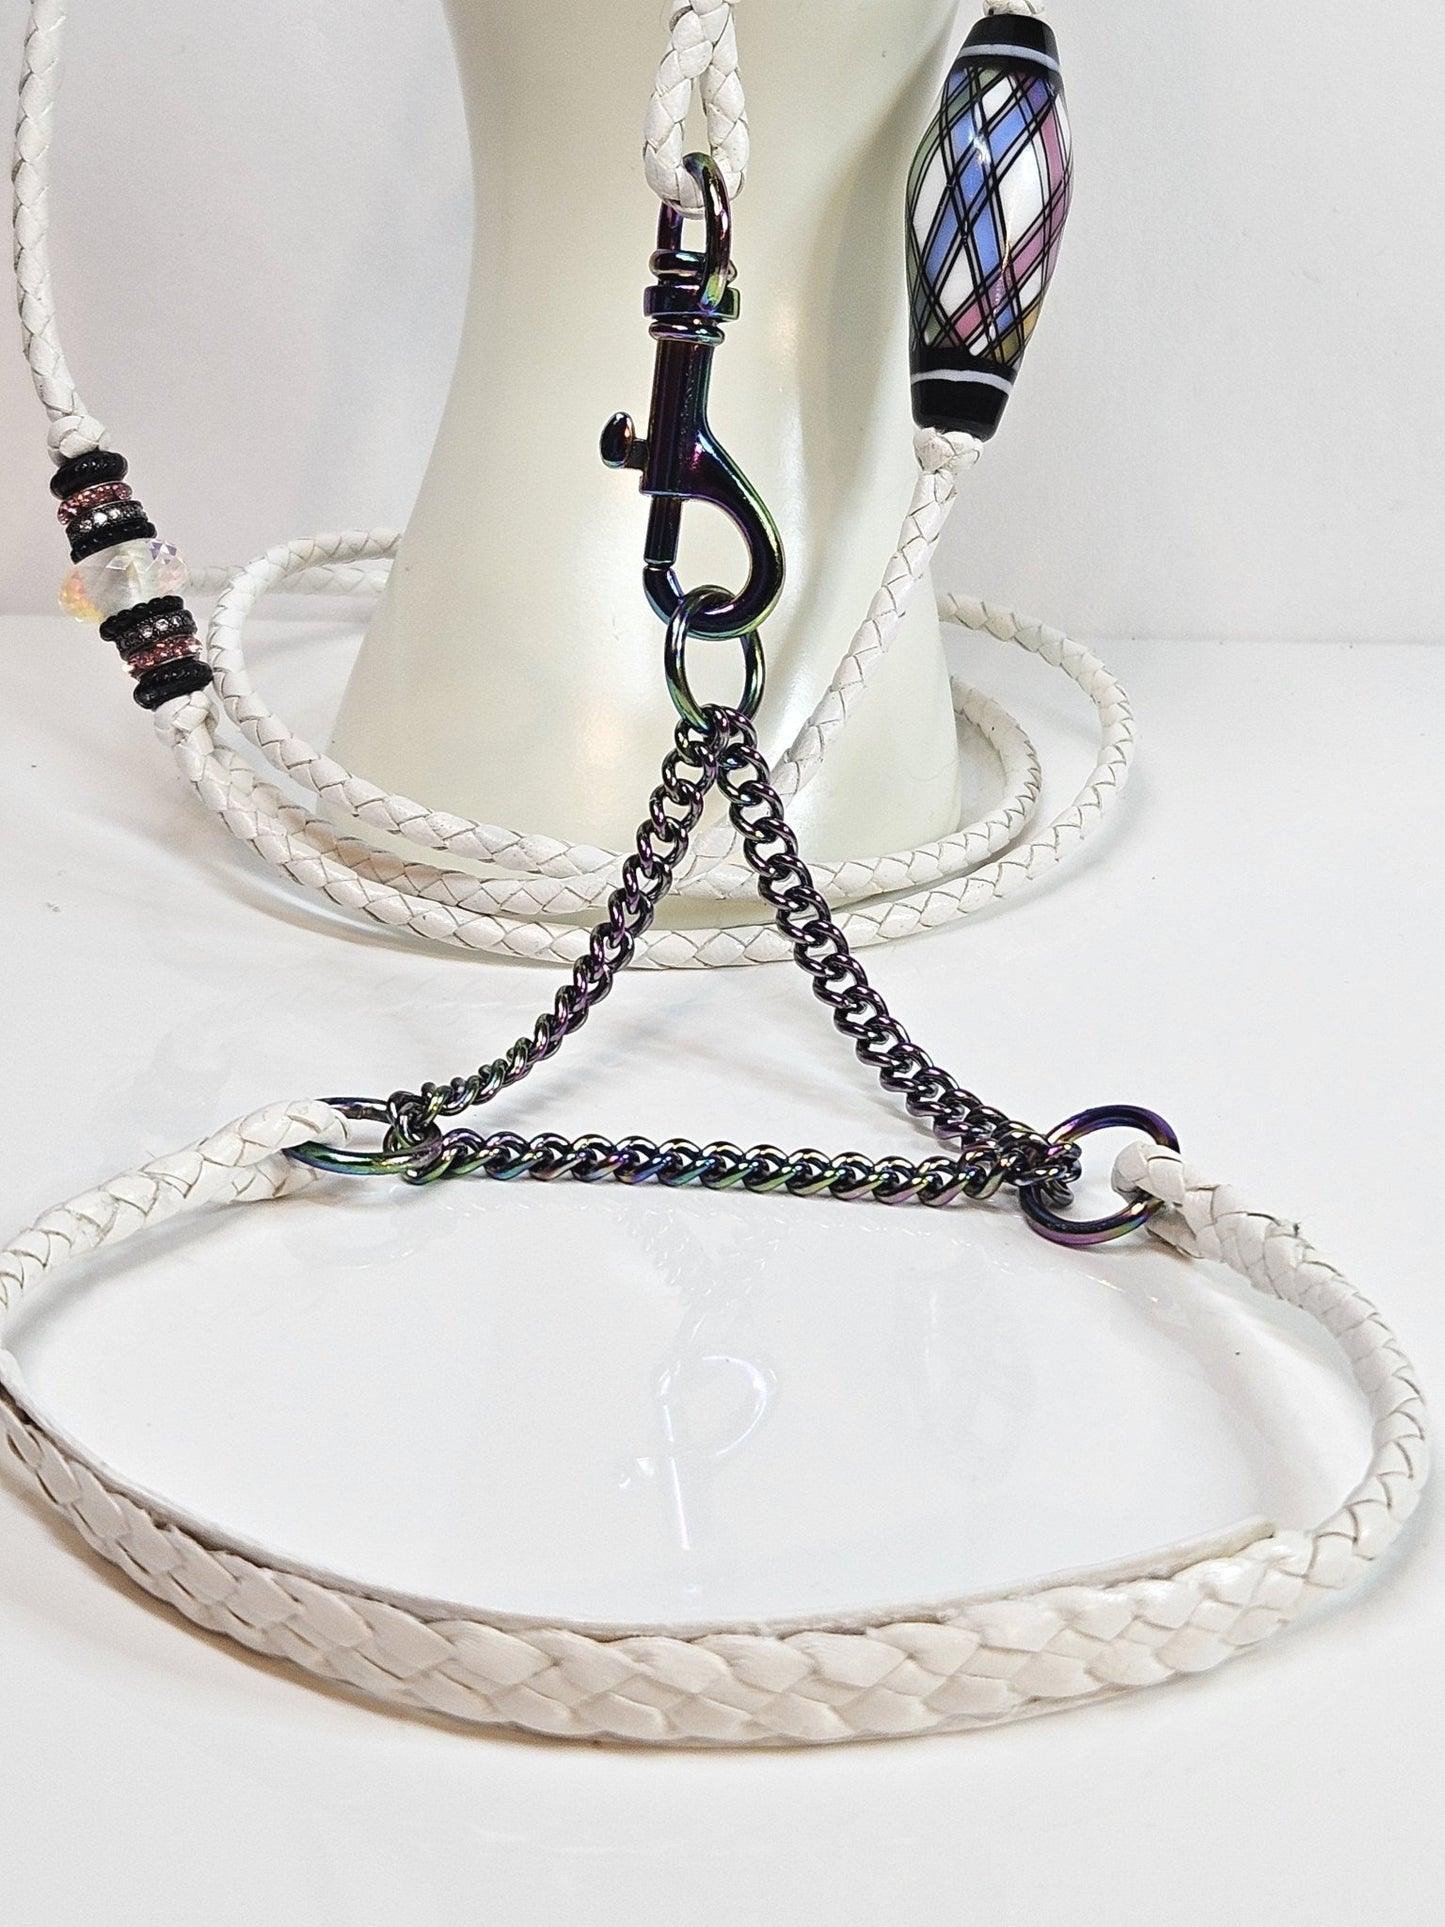 50" Snap Hook End Show Lead with matching Martingale Collar - Champion Show Leads